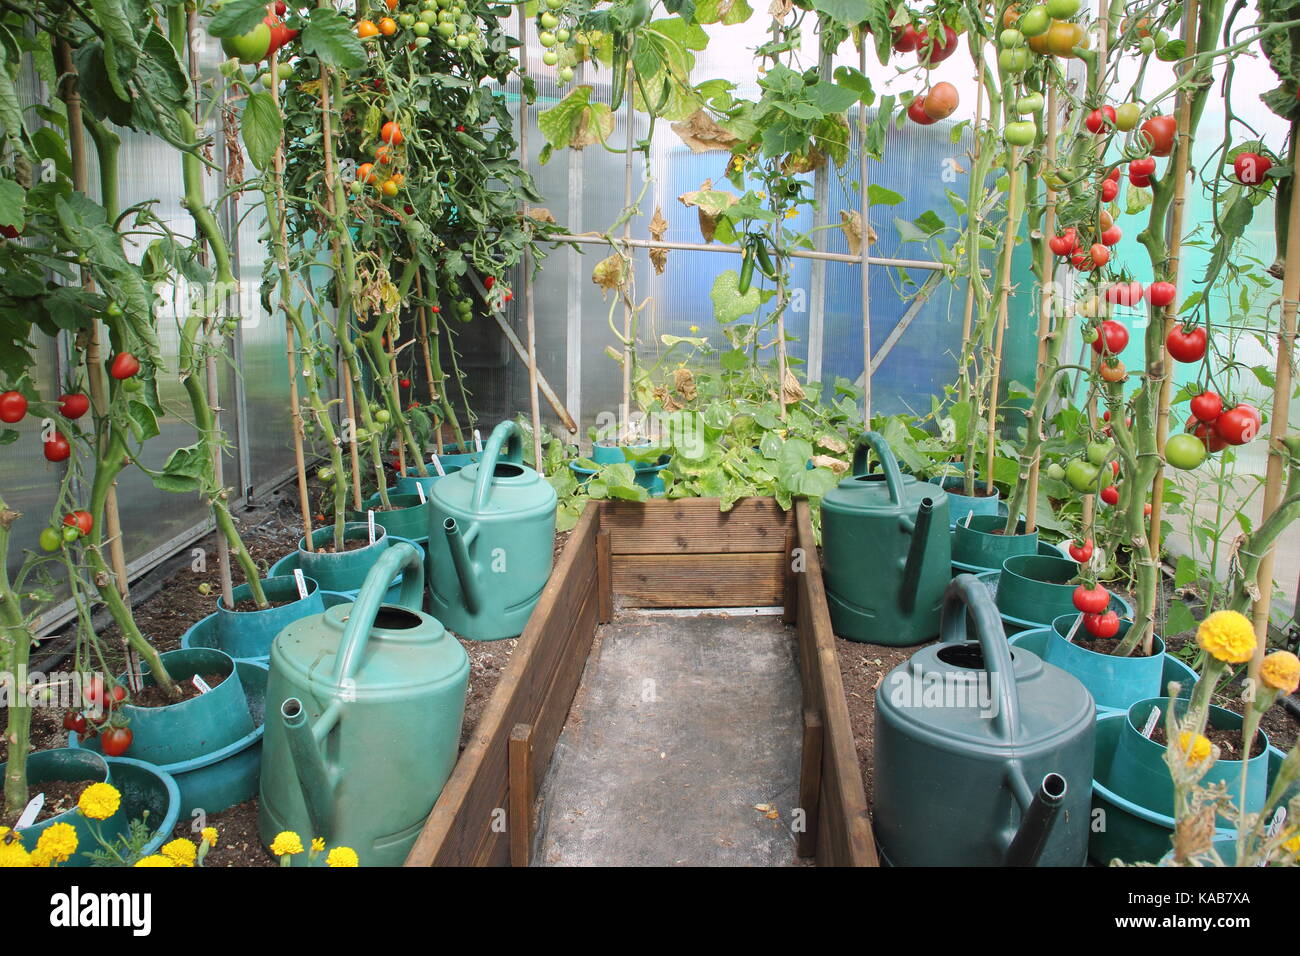 Tomato plants, stripped of their lower leaves to encourage a better harvest, growing in raised borders in a greenhouse on an English allotment garden Stock Photo